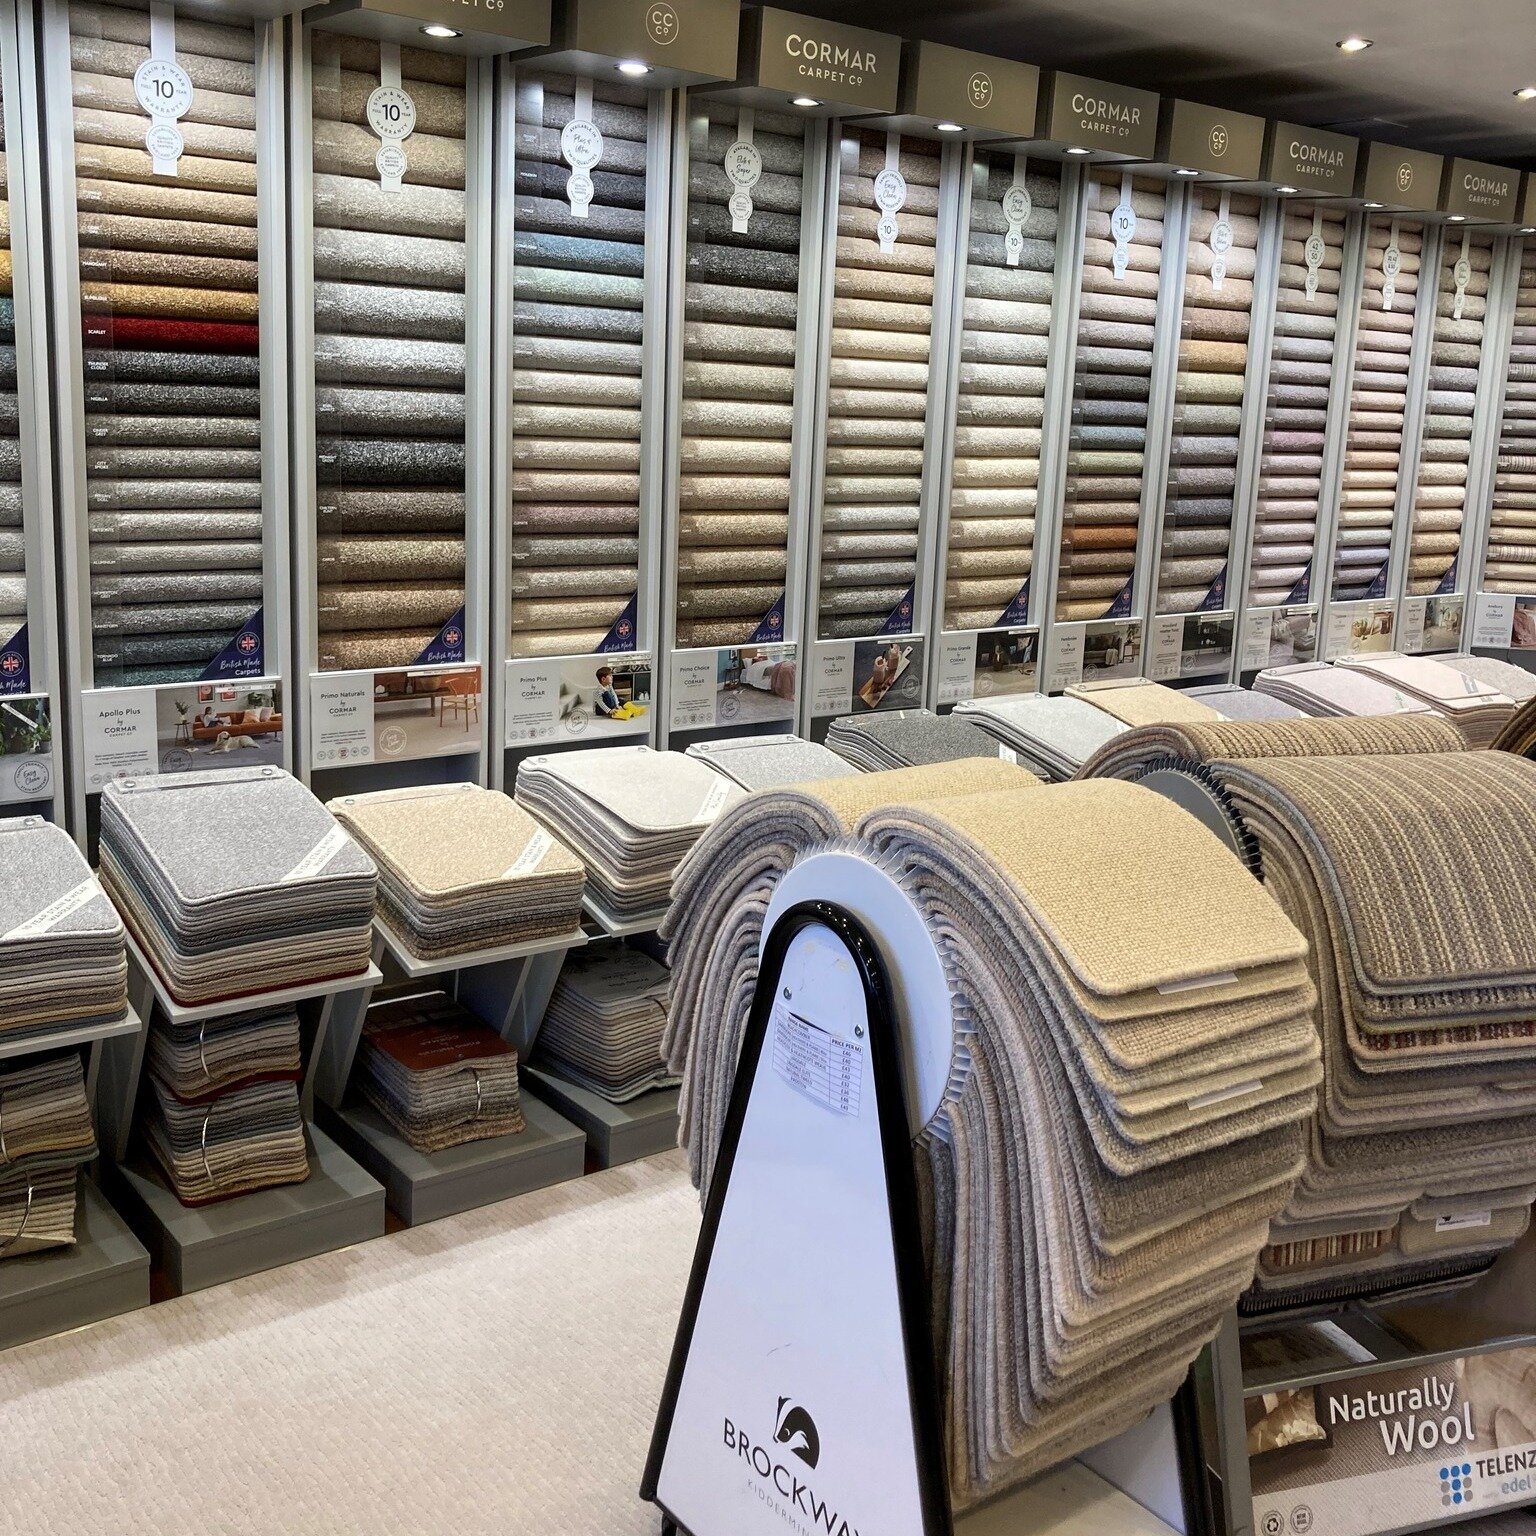 We have a wonderful Carpet Showroom upstairs showcasing many different ranges ~ from short, practical twist piles to luxurious deep pile carpets and Axminister's!

Plenty for you to choose from at affordable prices too! 🙂

If you're after something 